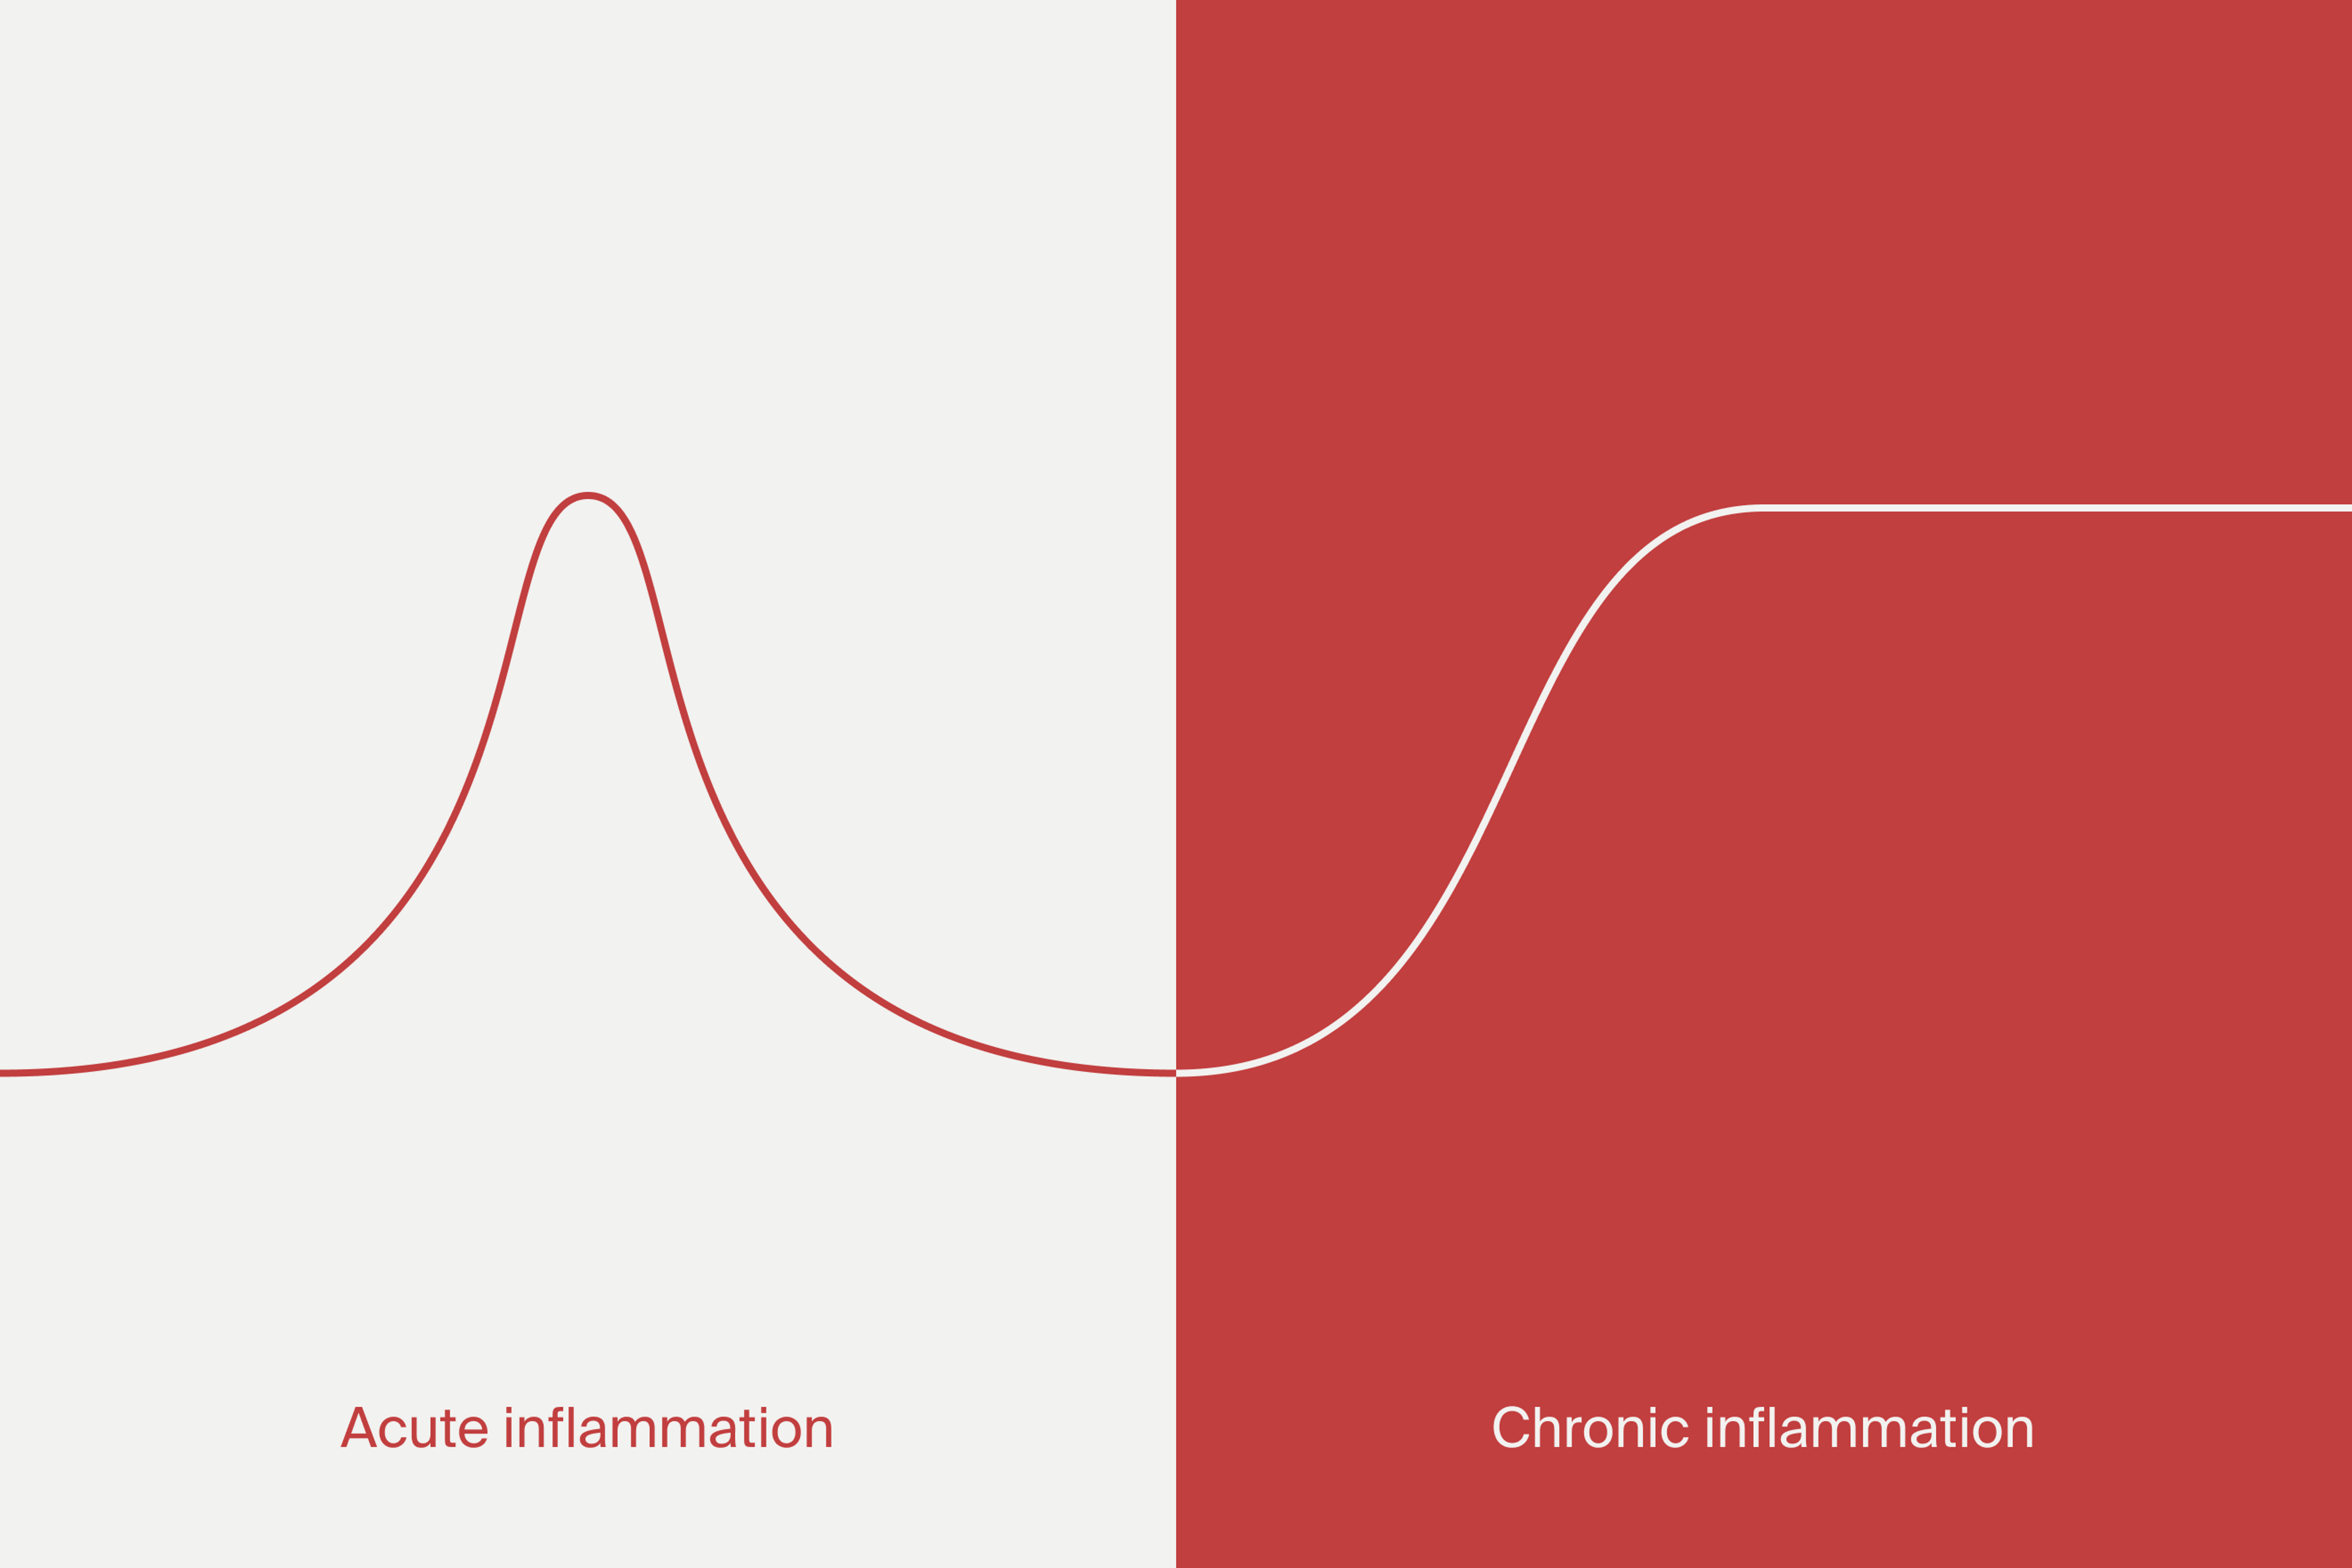 Acute inflammation versus chronic inflammation